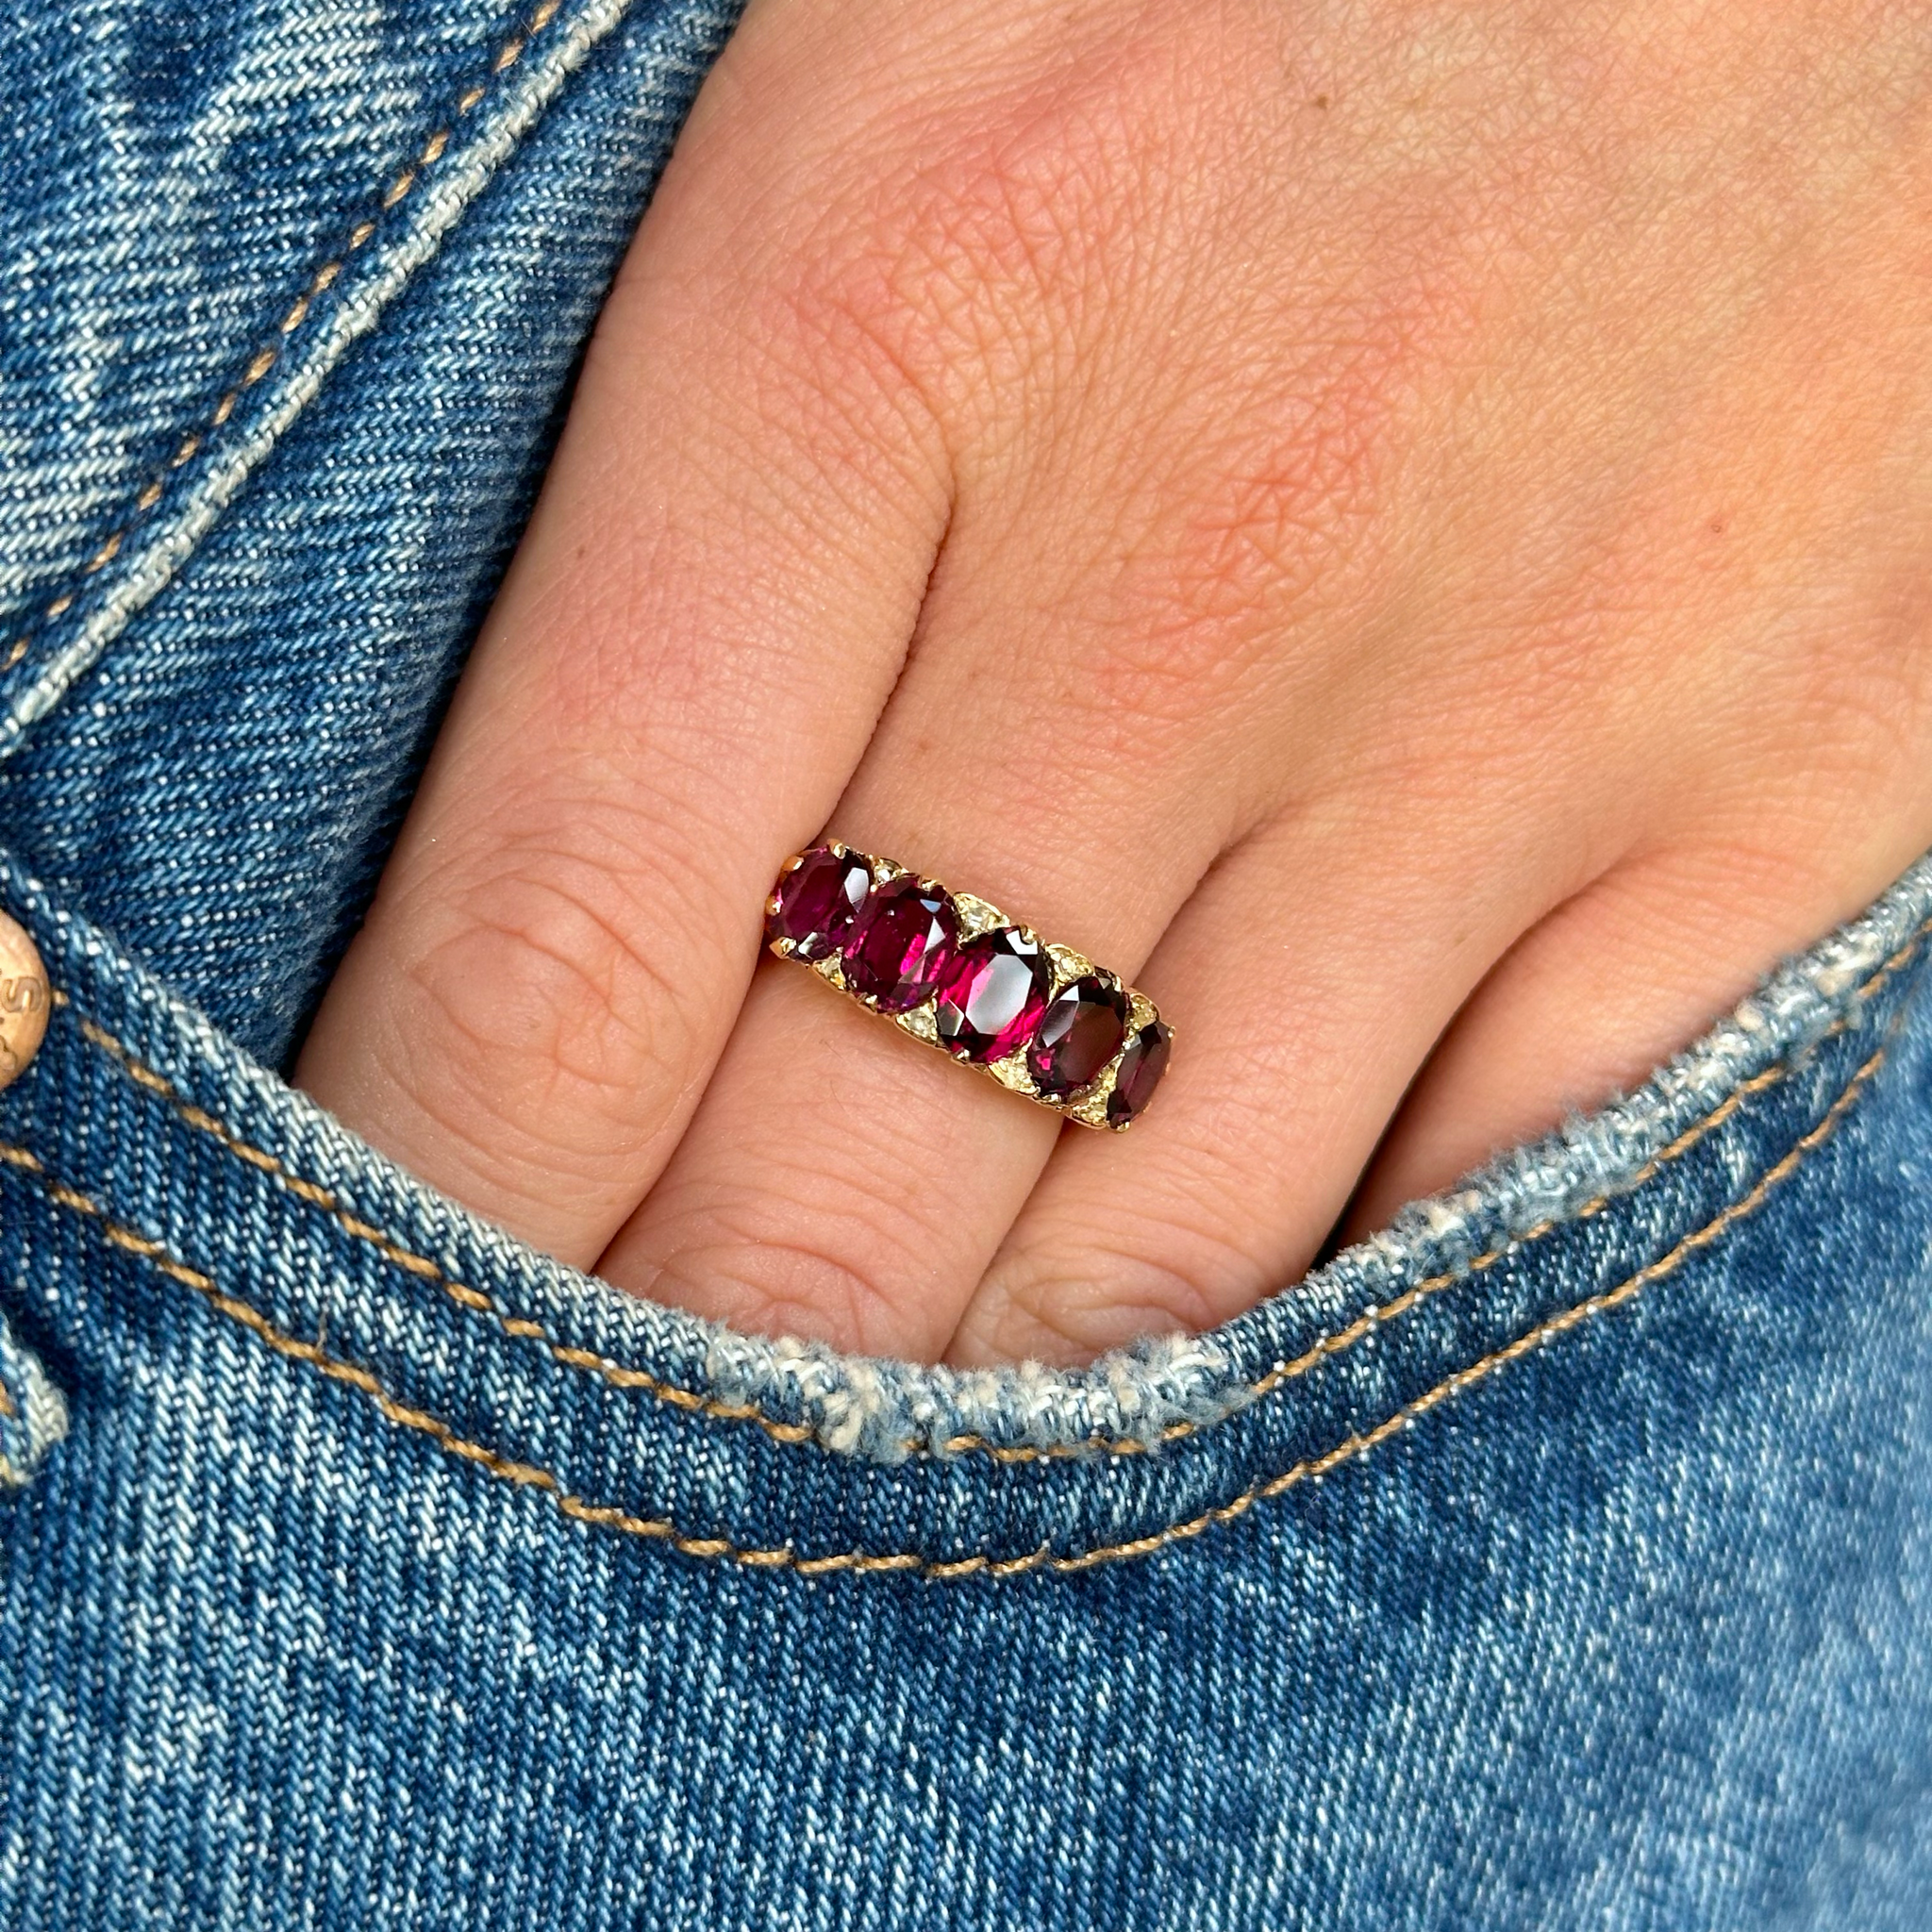 victorian five stone garnet ring worn on hand in pocket of jeans